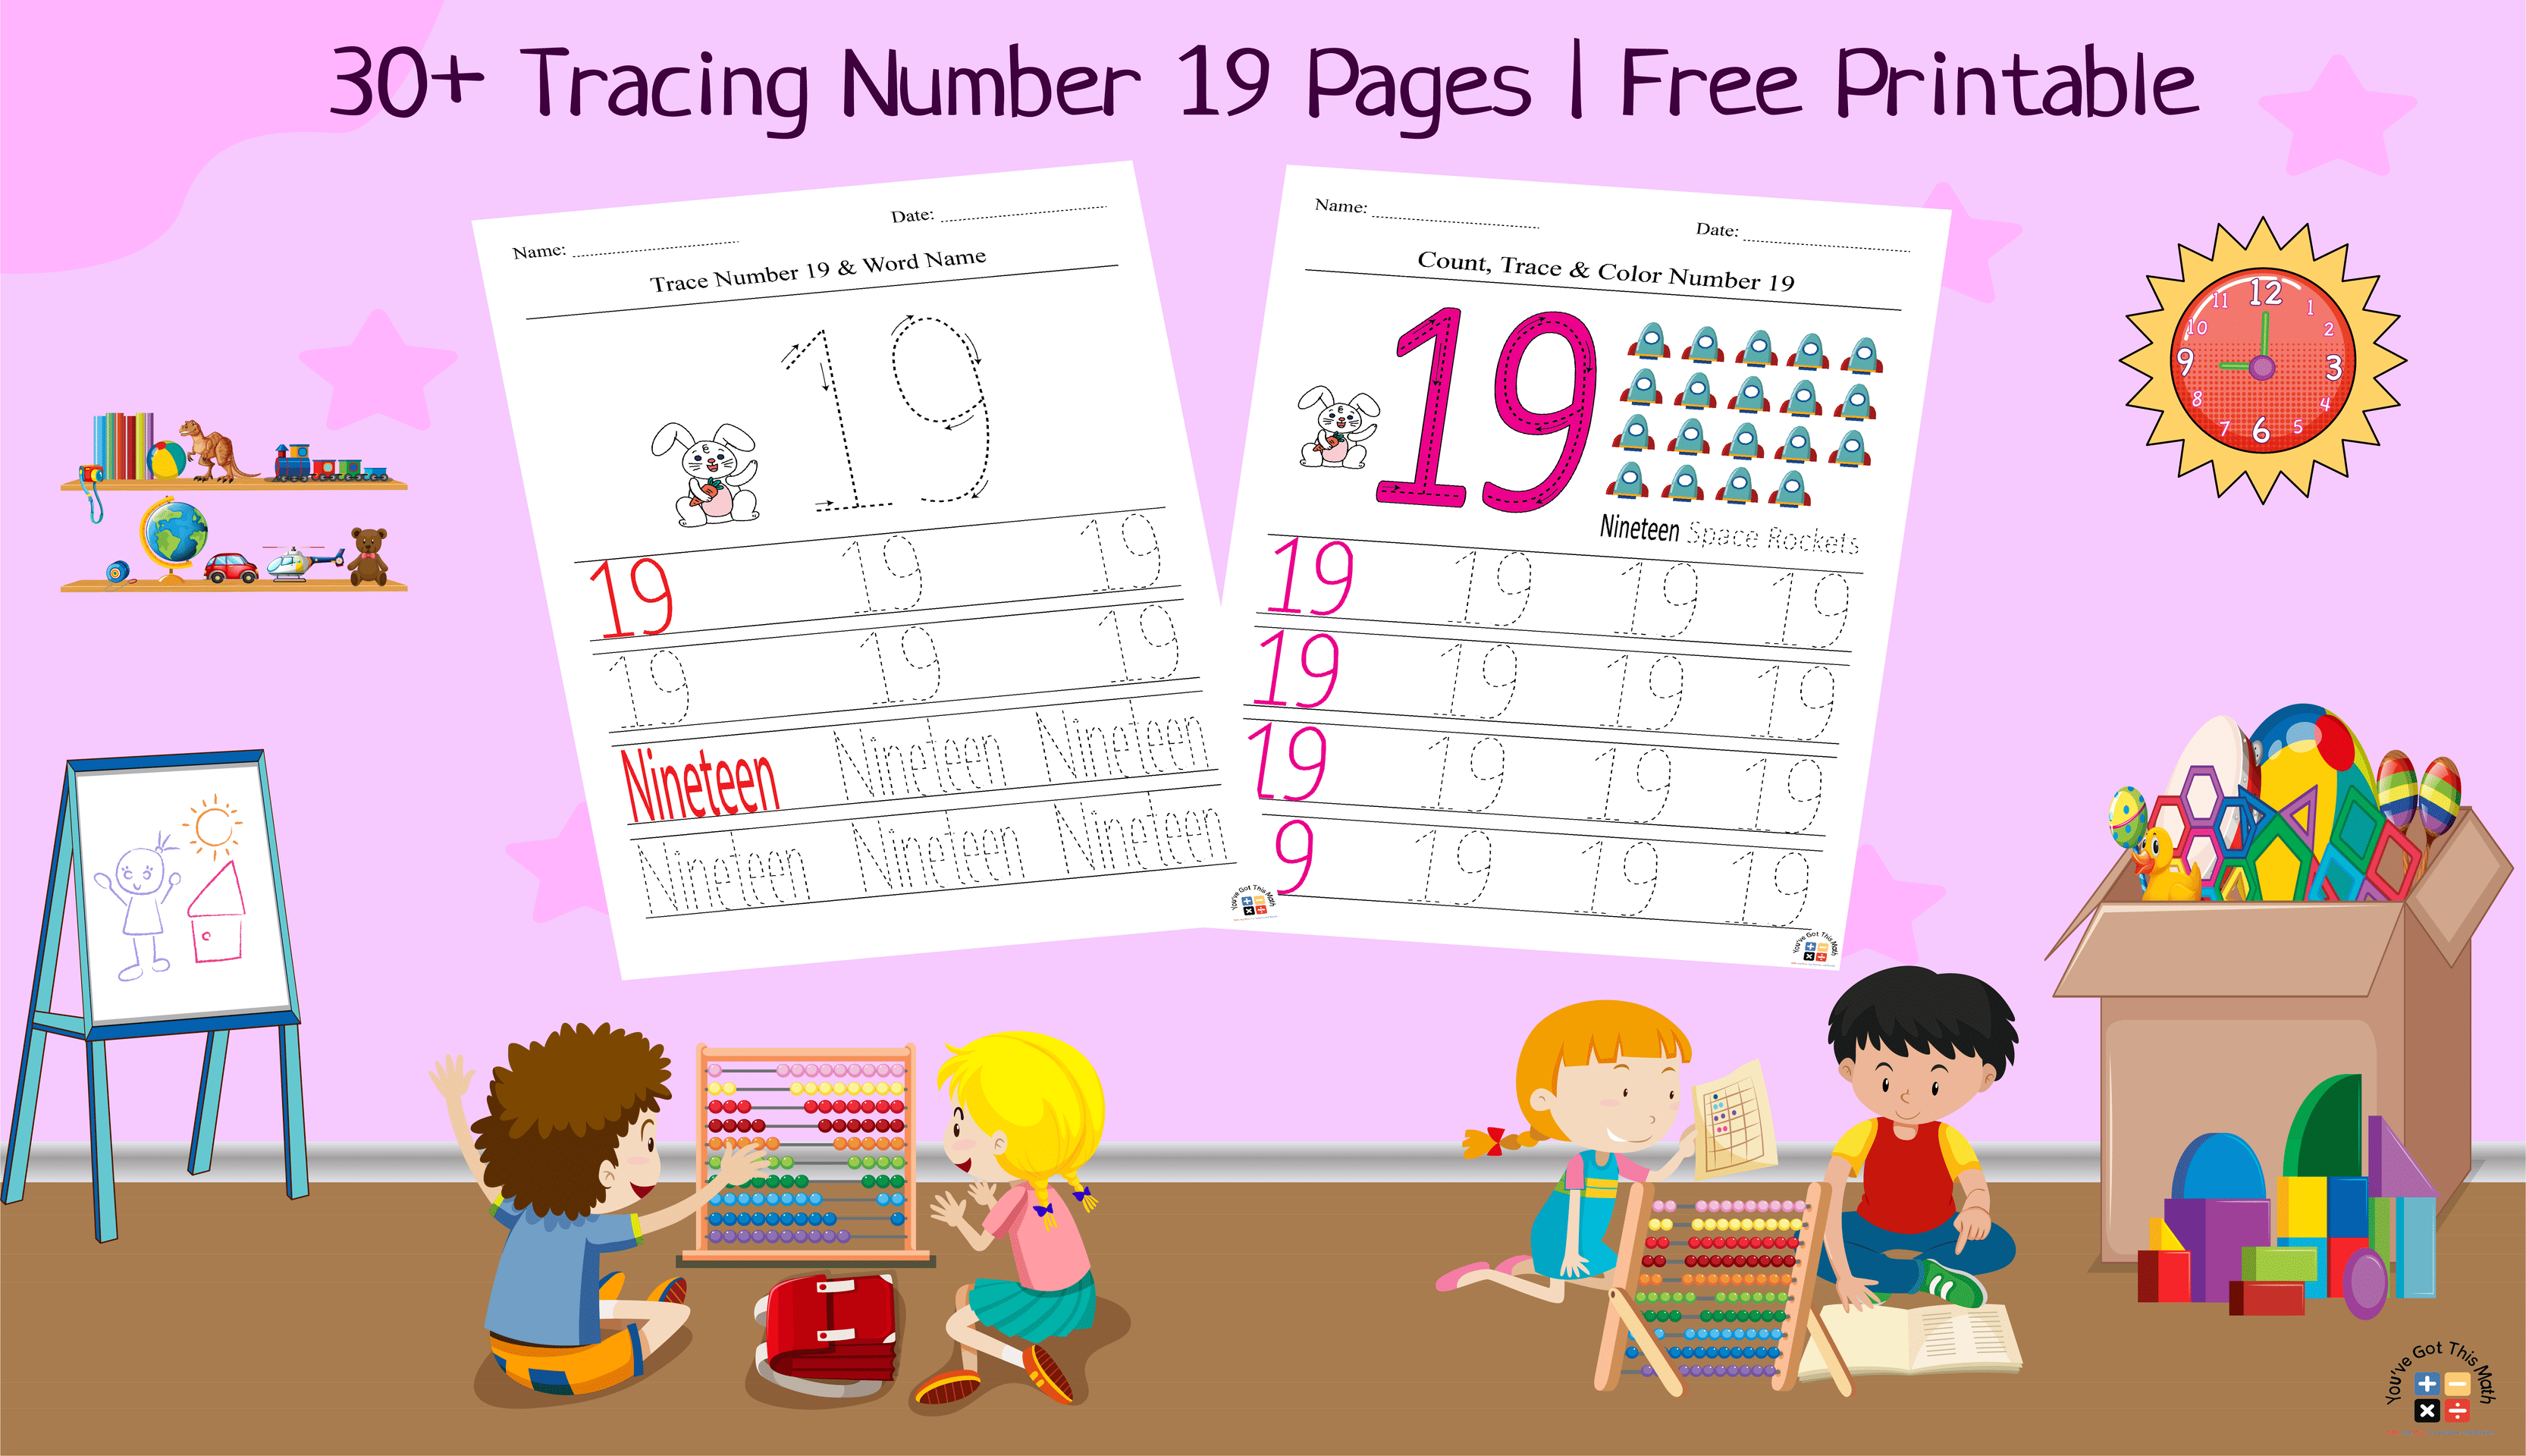 30+ Tracing Number 19 Pages | Free Printable